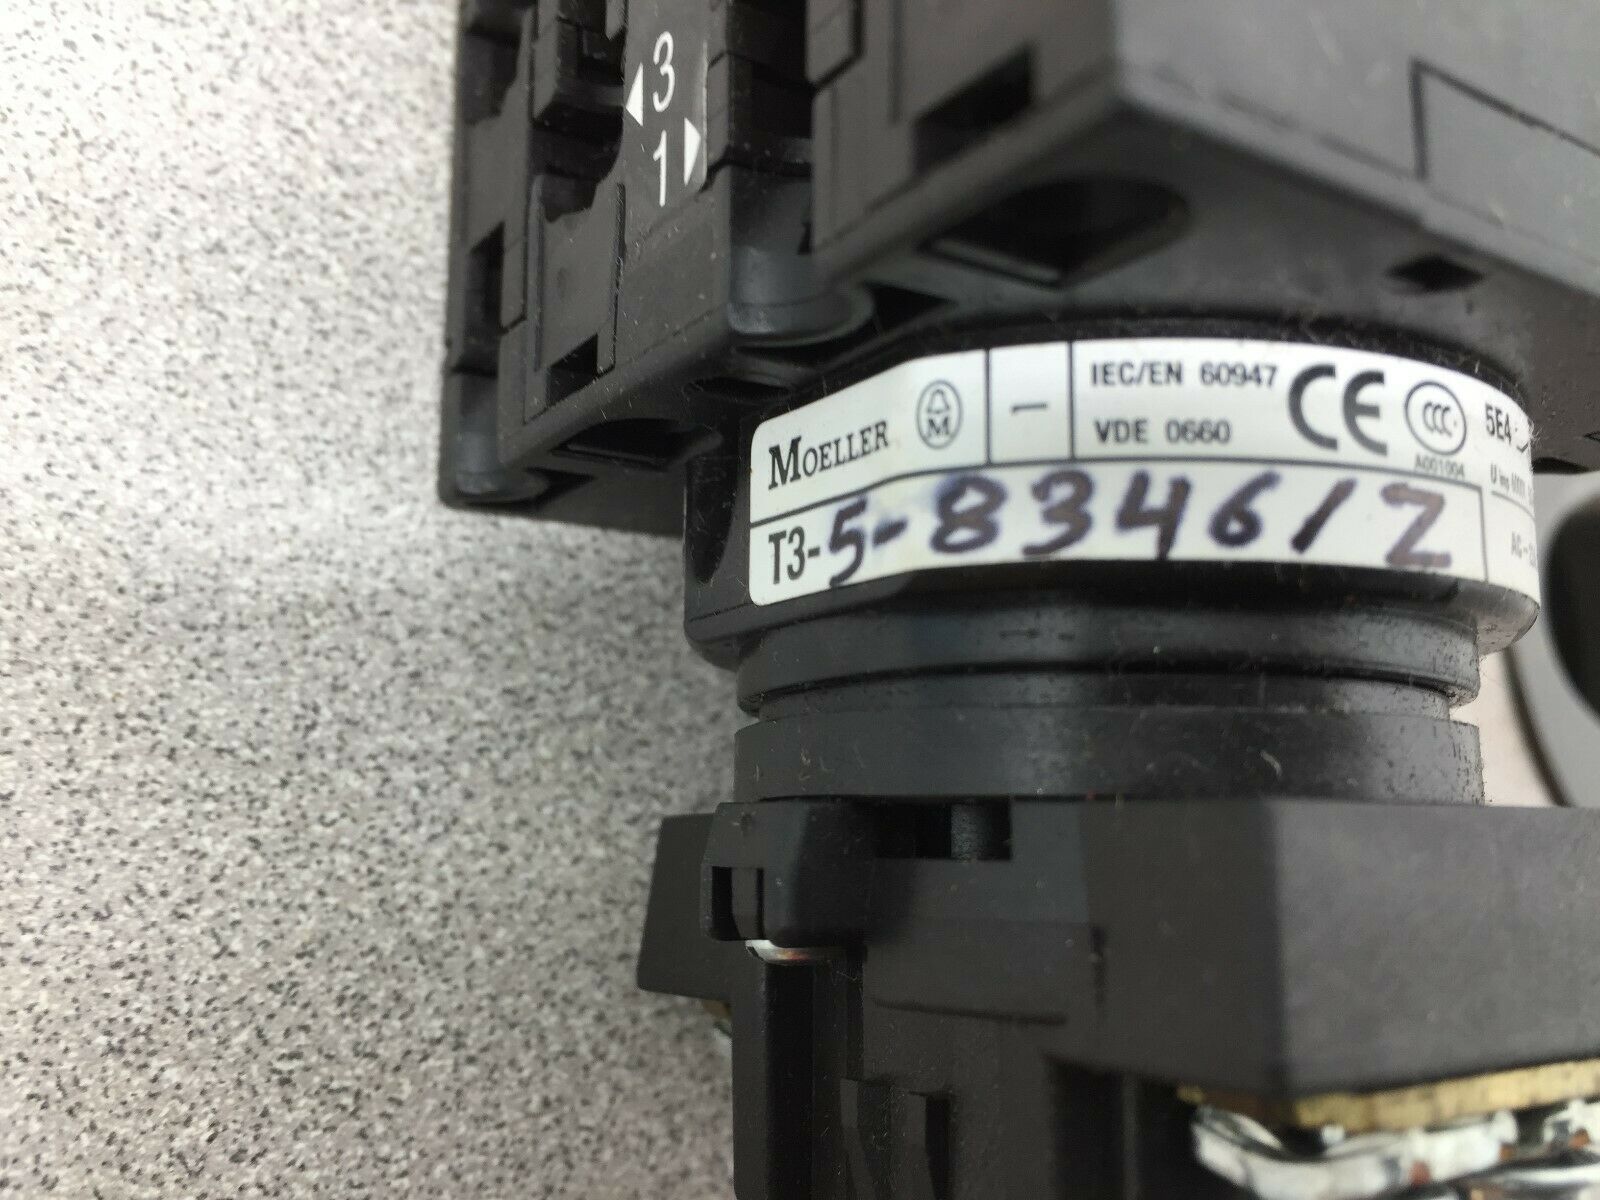 USED MOELLER DICONNECT SWITCH T3-5-8346/Z